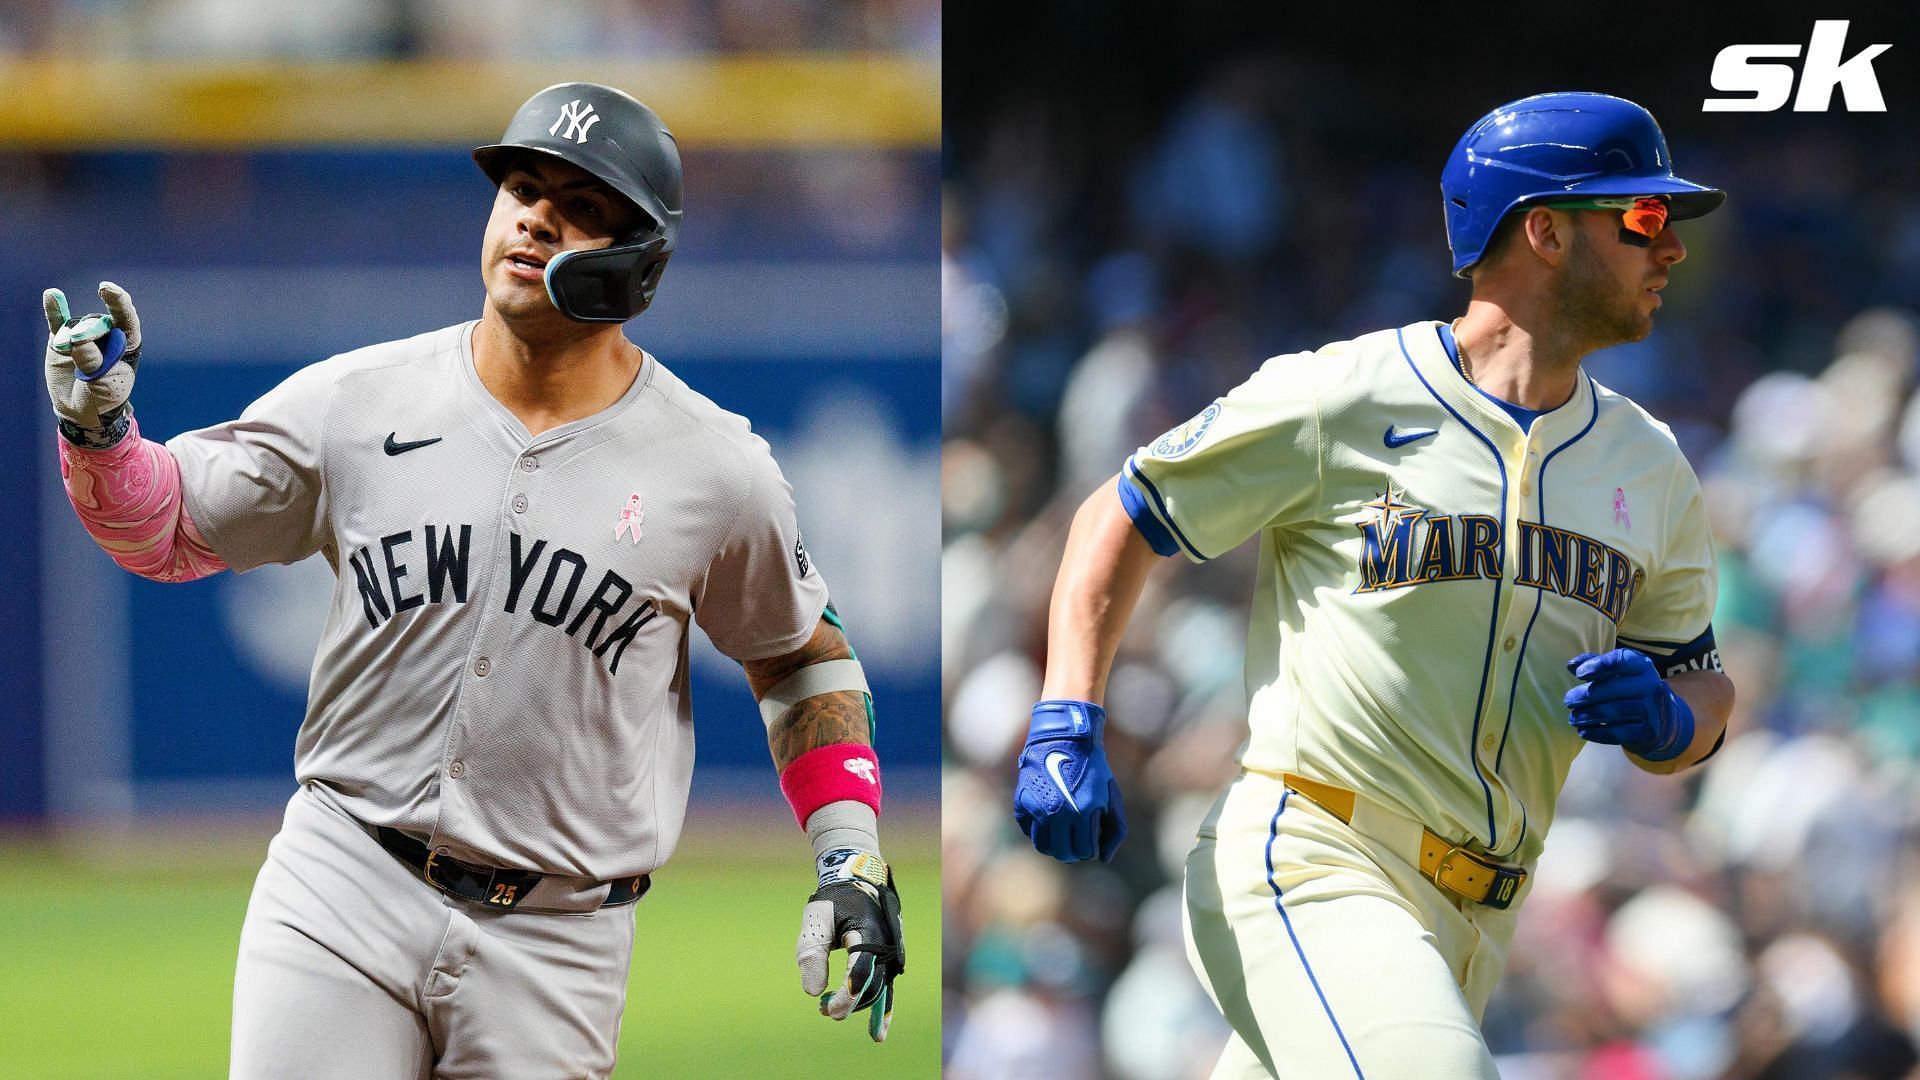 Gleyber Torres and Mitch Garver are two players that fantasy baseball managers shoud look to move on from